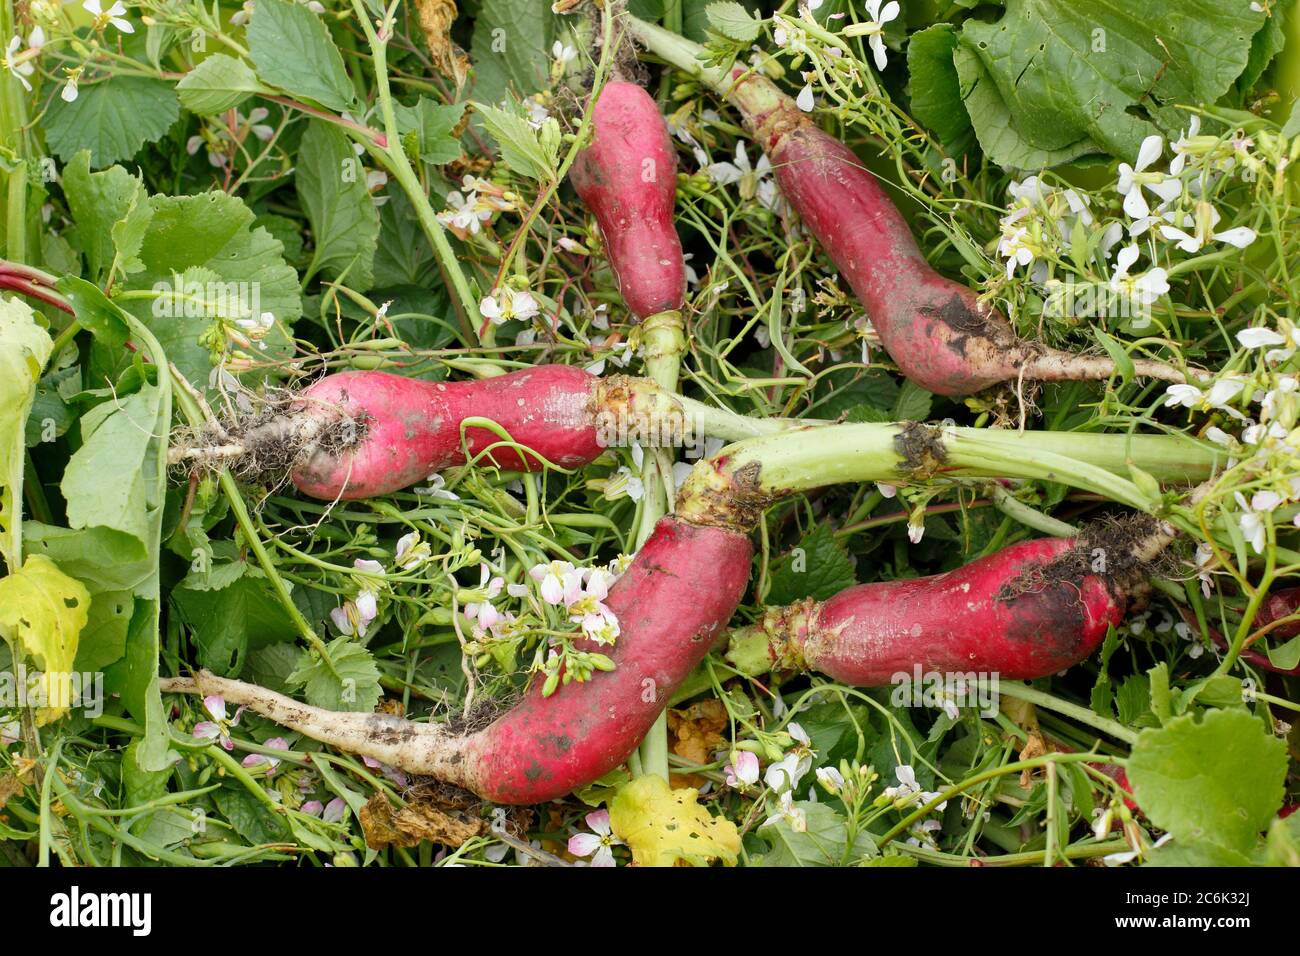 Raphanus sativus 'French Breakfast'. Flower heads and large, woody roots of bolted radish plants for composting. UK Stock Photo